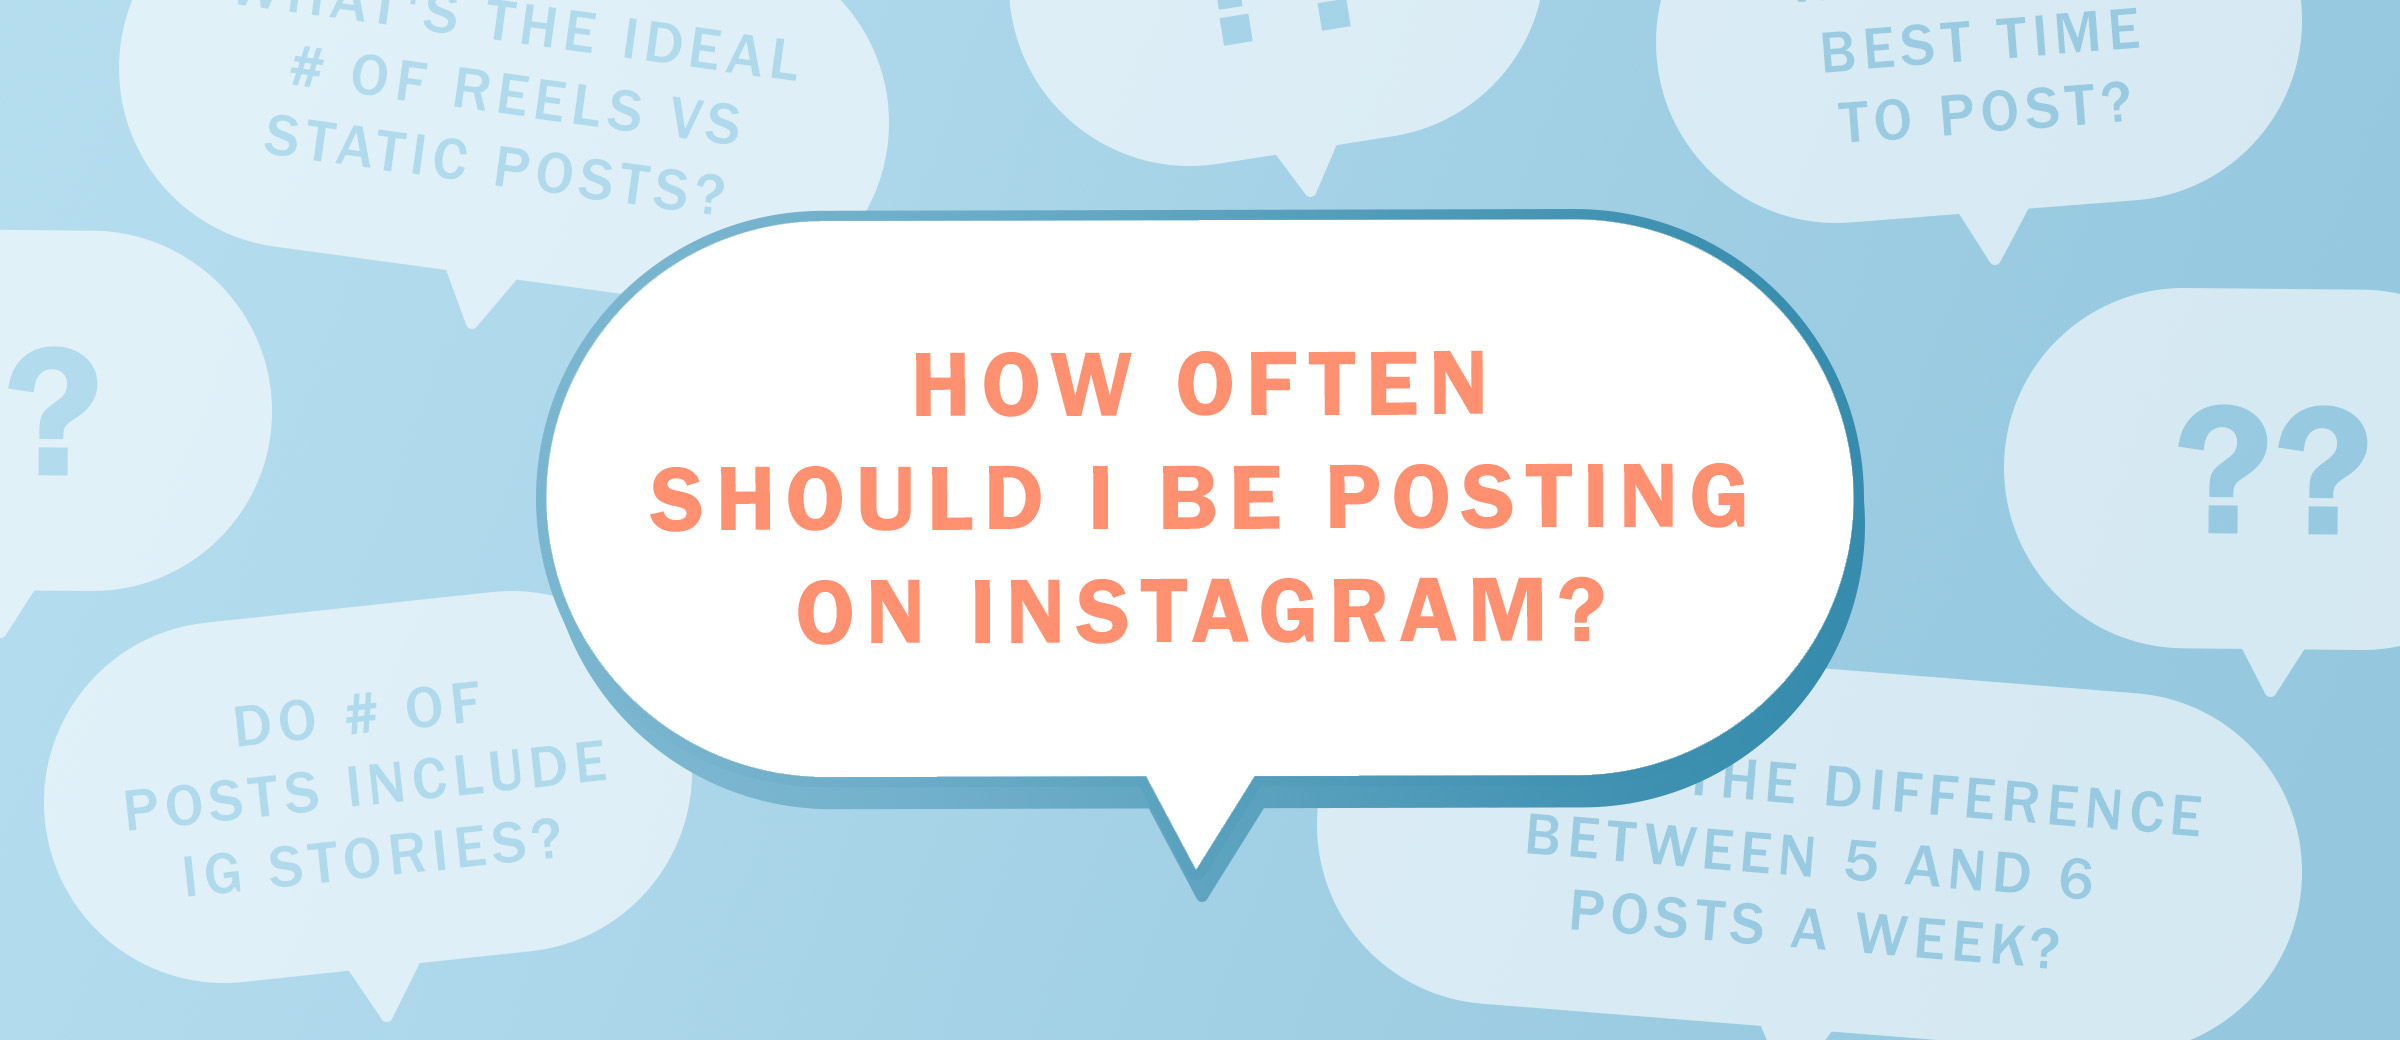 How Often Should I Post On Instagram?, by gabriella-layne-avery